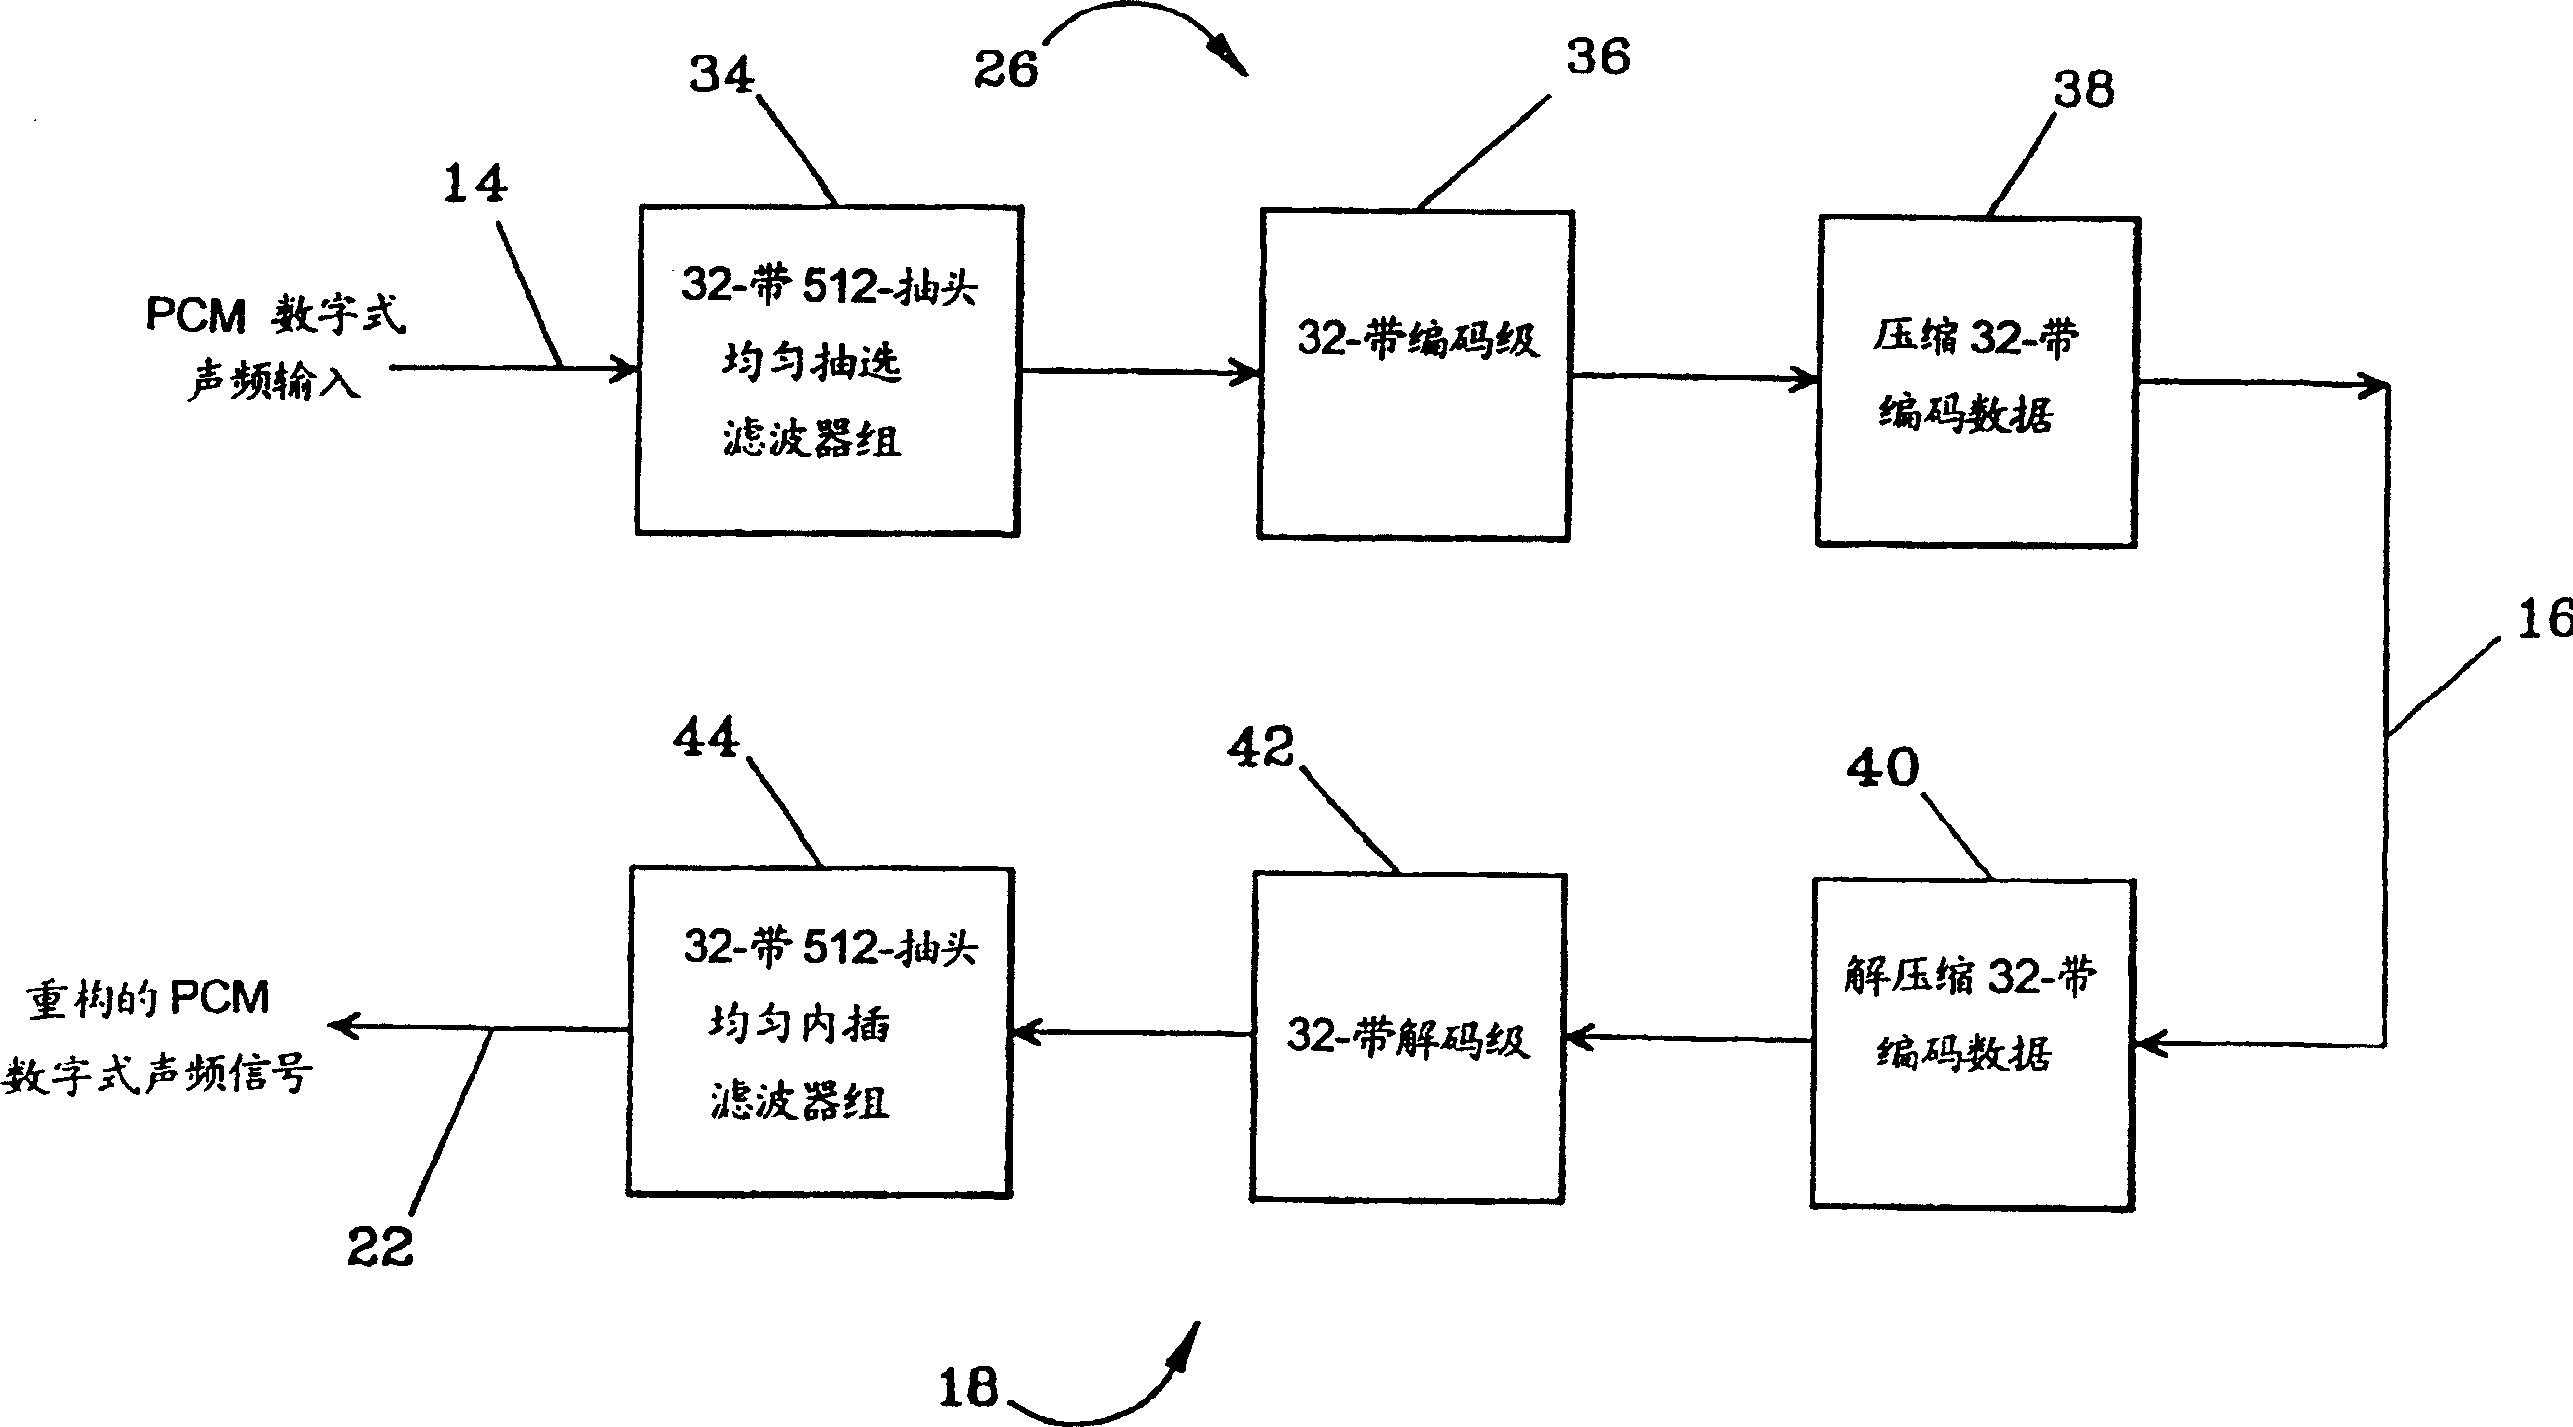 Multi-channel audio frequency coder